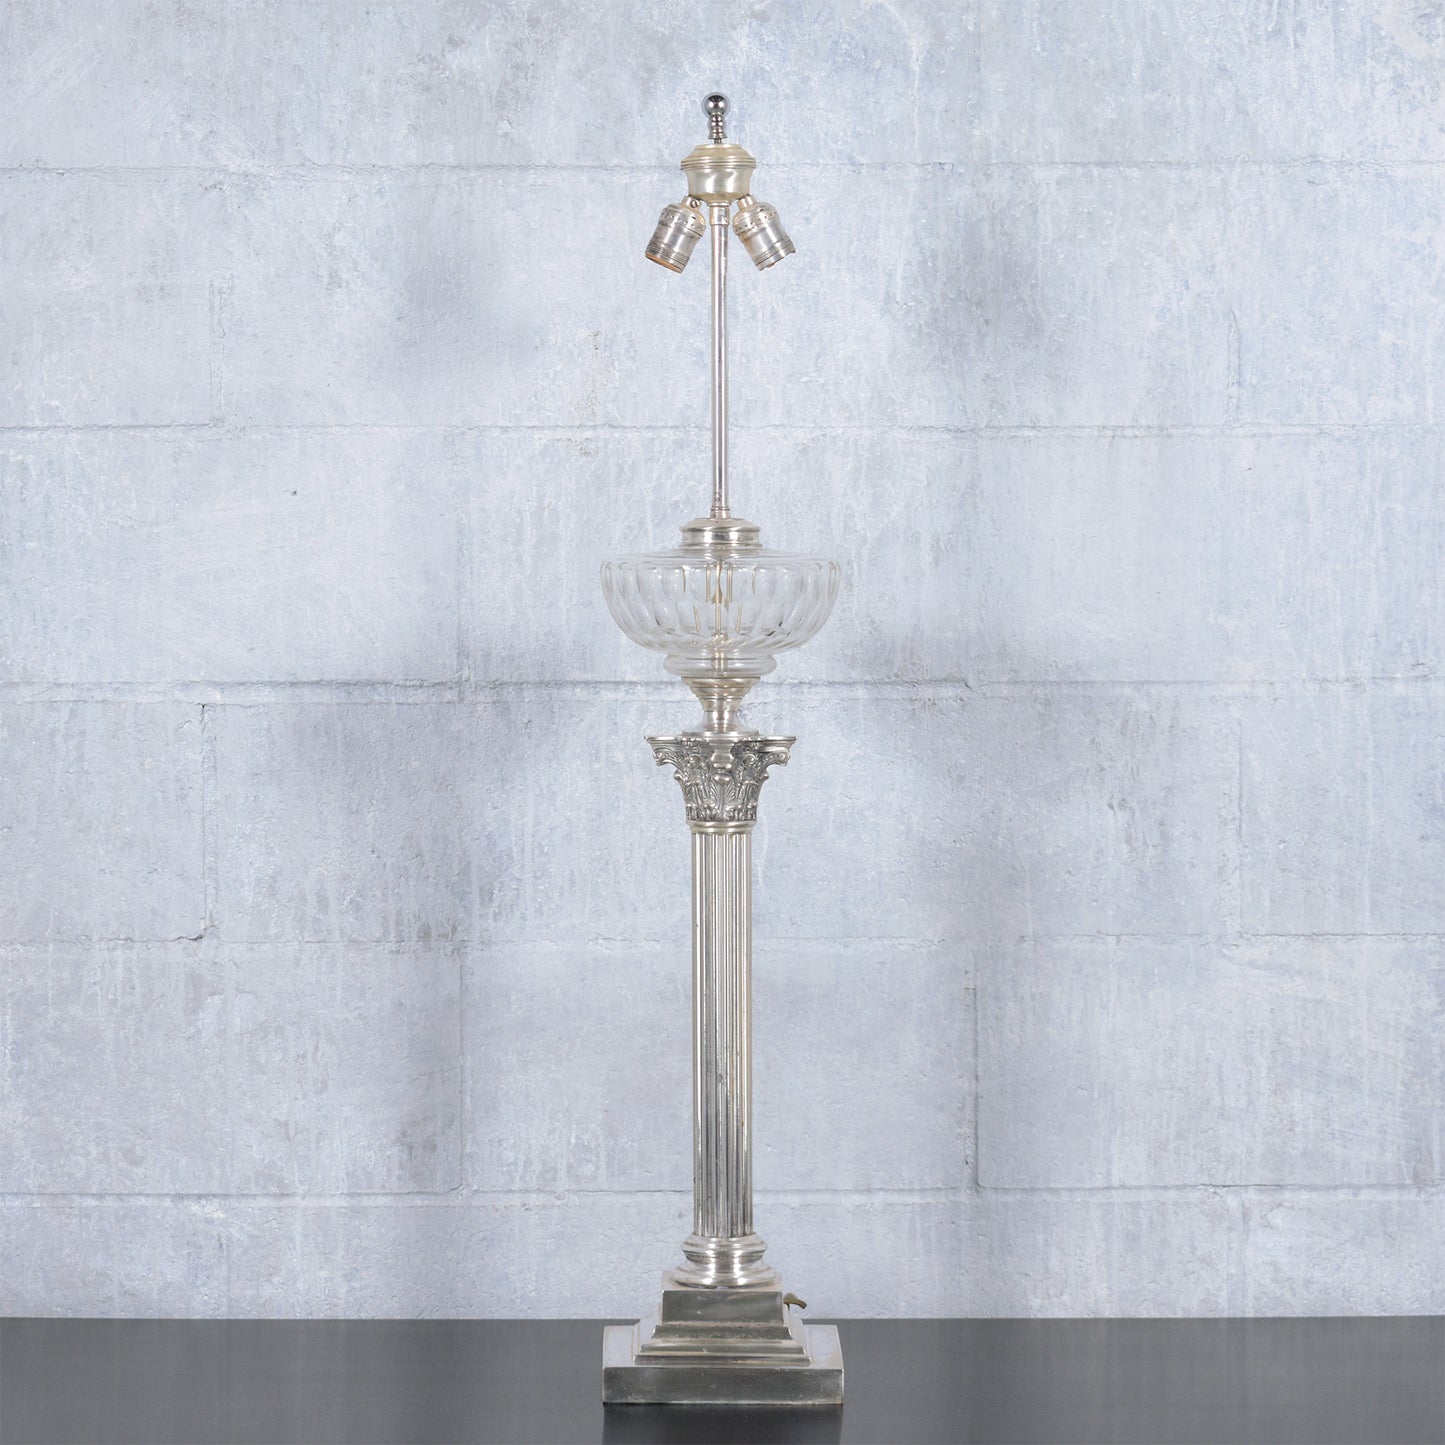 Restored Vintage Regency-Style Lamp Table with Silver Finish and Glass Urn